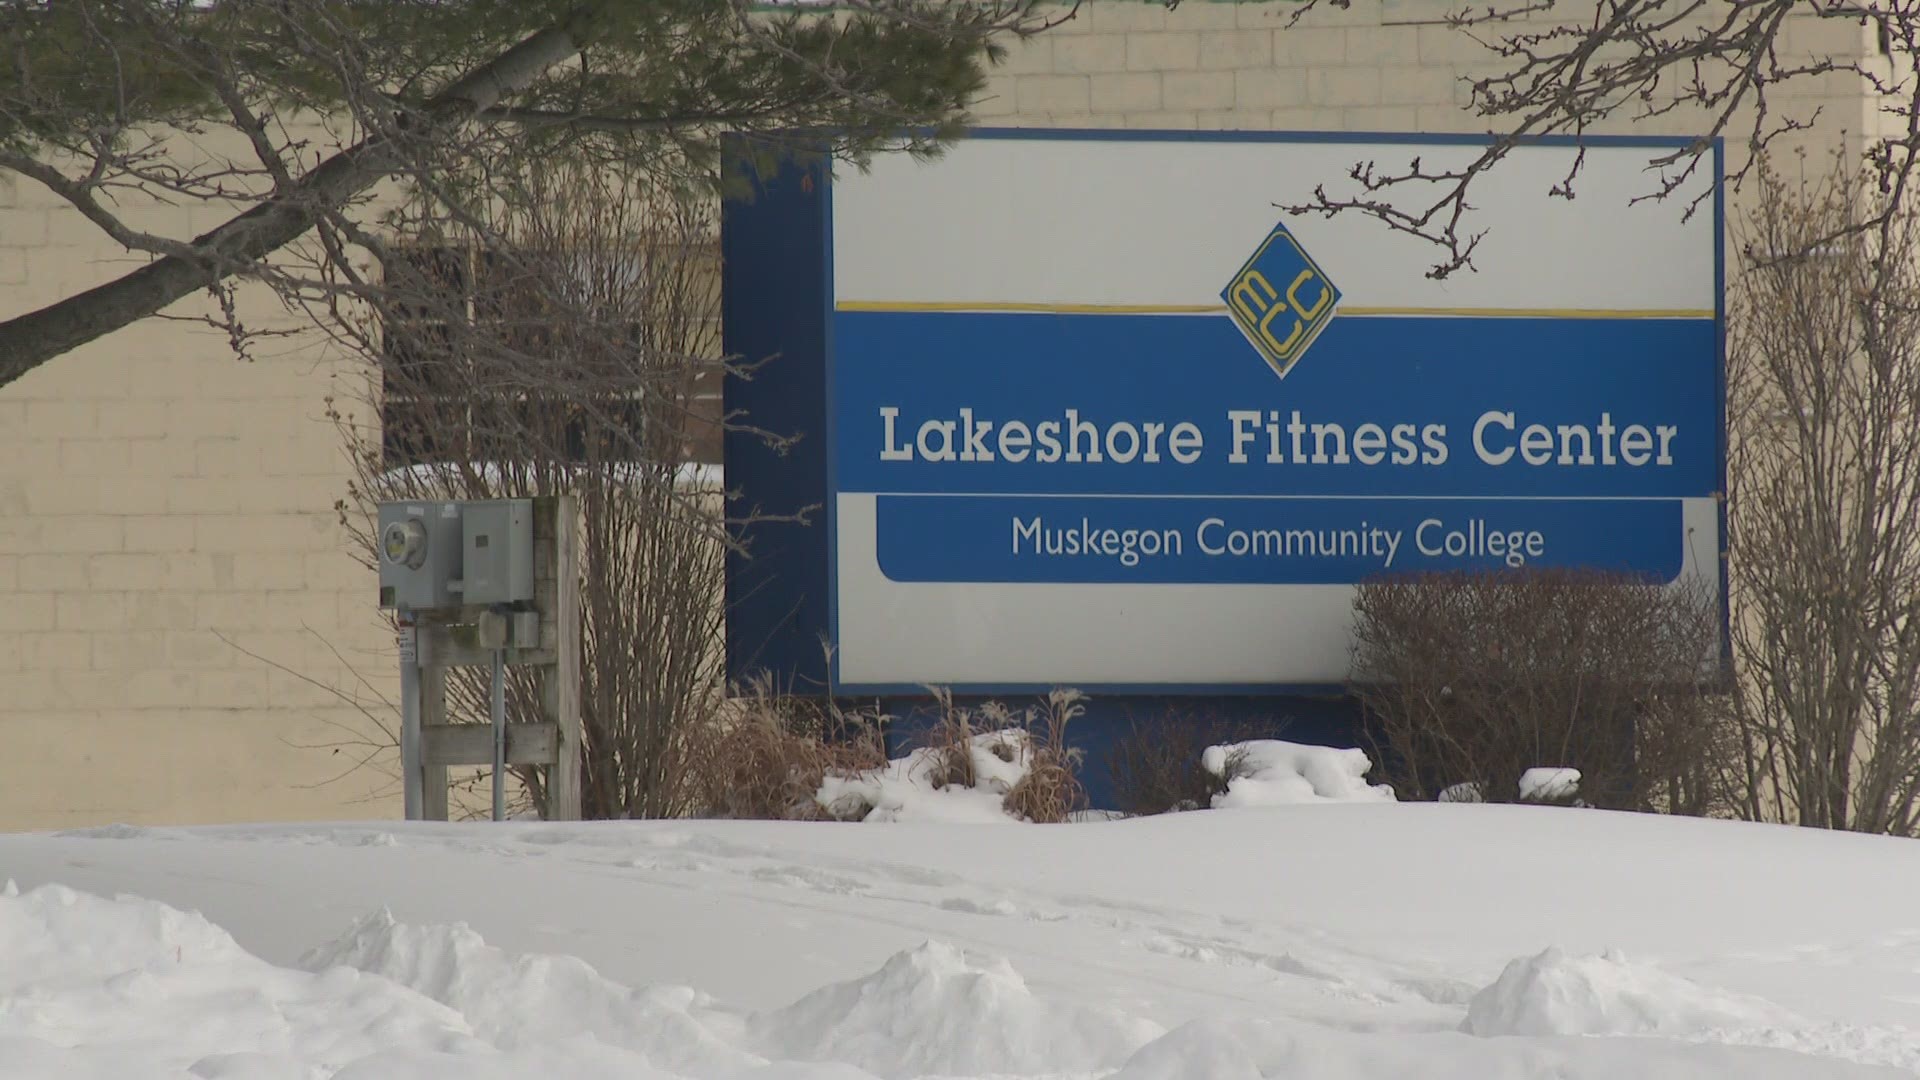 Trustees at Muskegon Community College will accept a $1.17 million purchase offer for the college's closed Lakeshore Fitness Center.